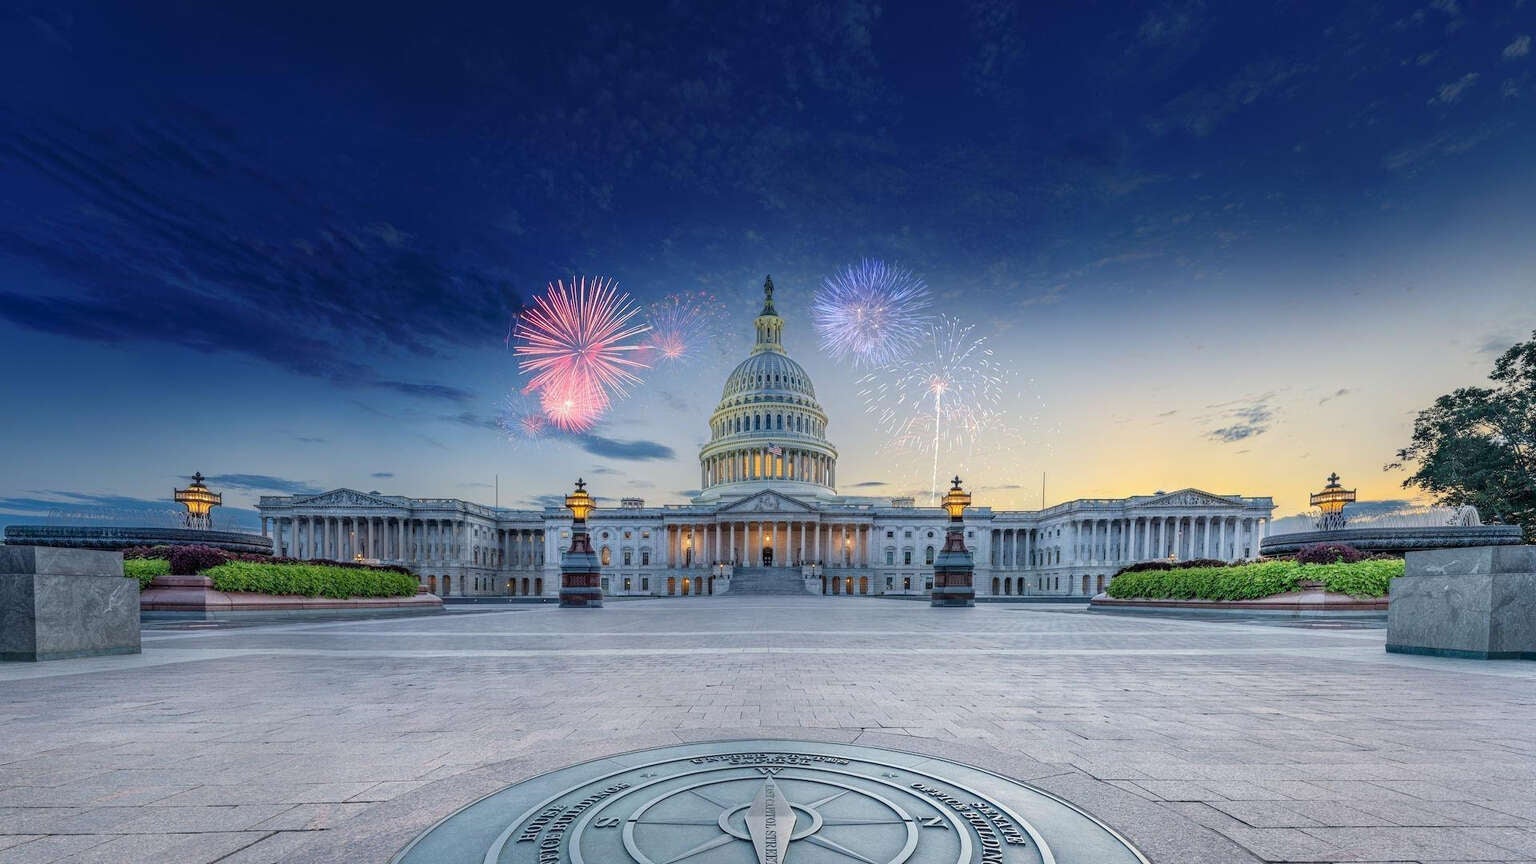 How to Watch 'A Capitol Fourth' Live for Free Without Cable The